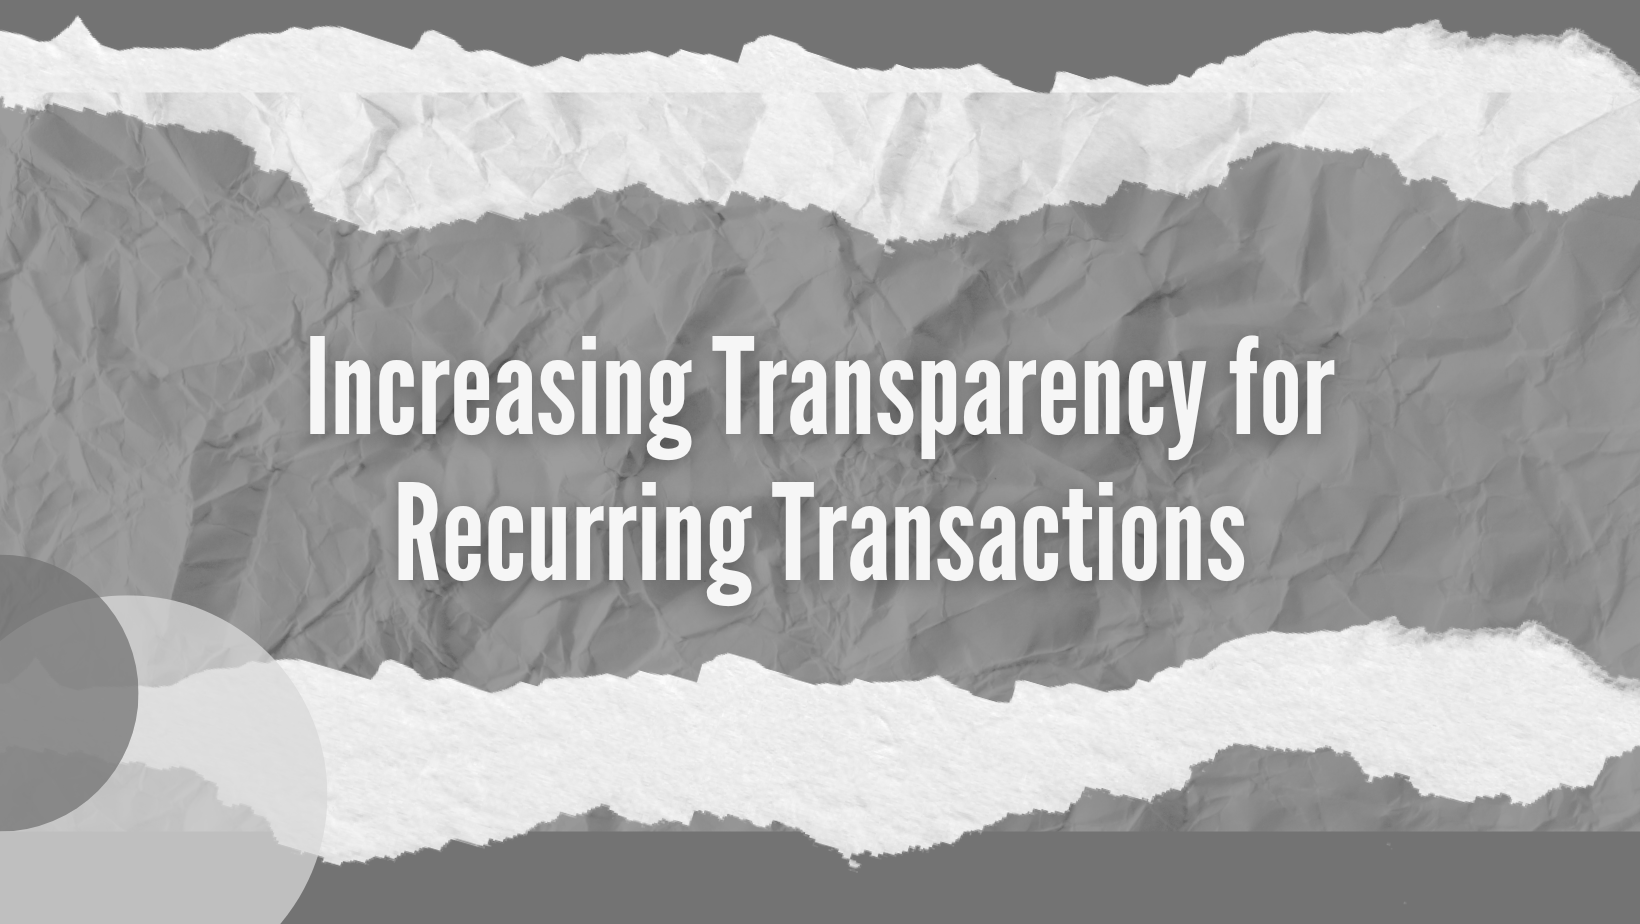 Increasing Transparency for Recurring Transactions